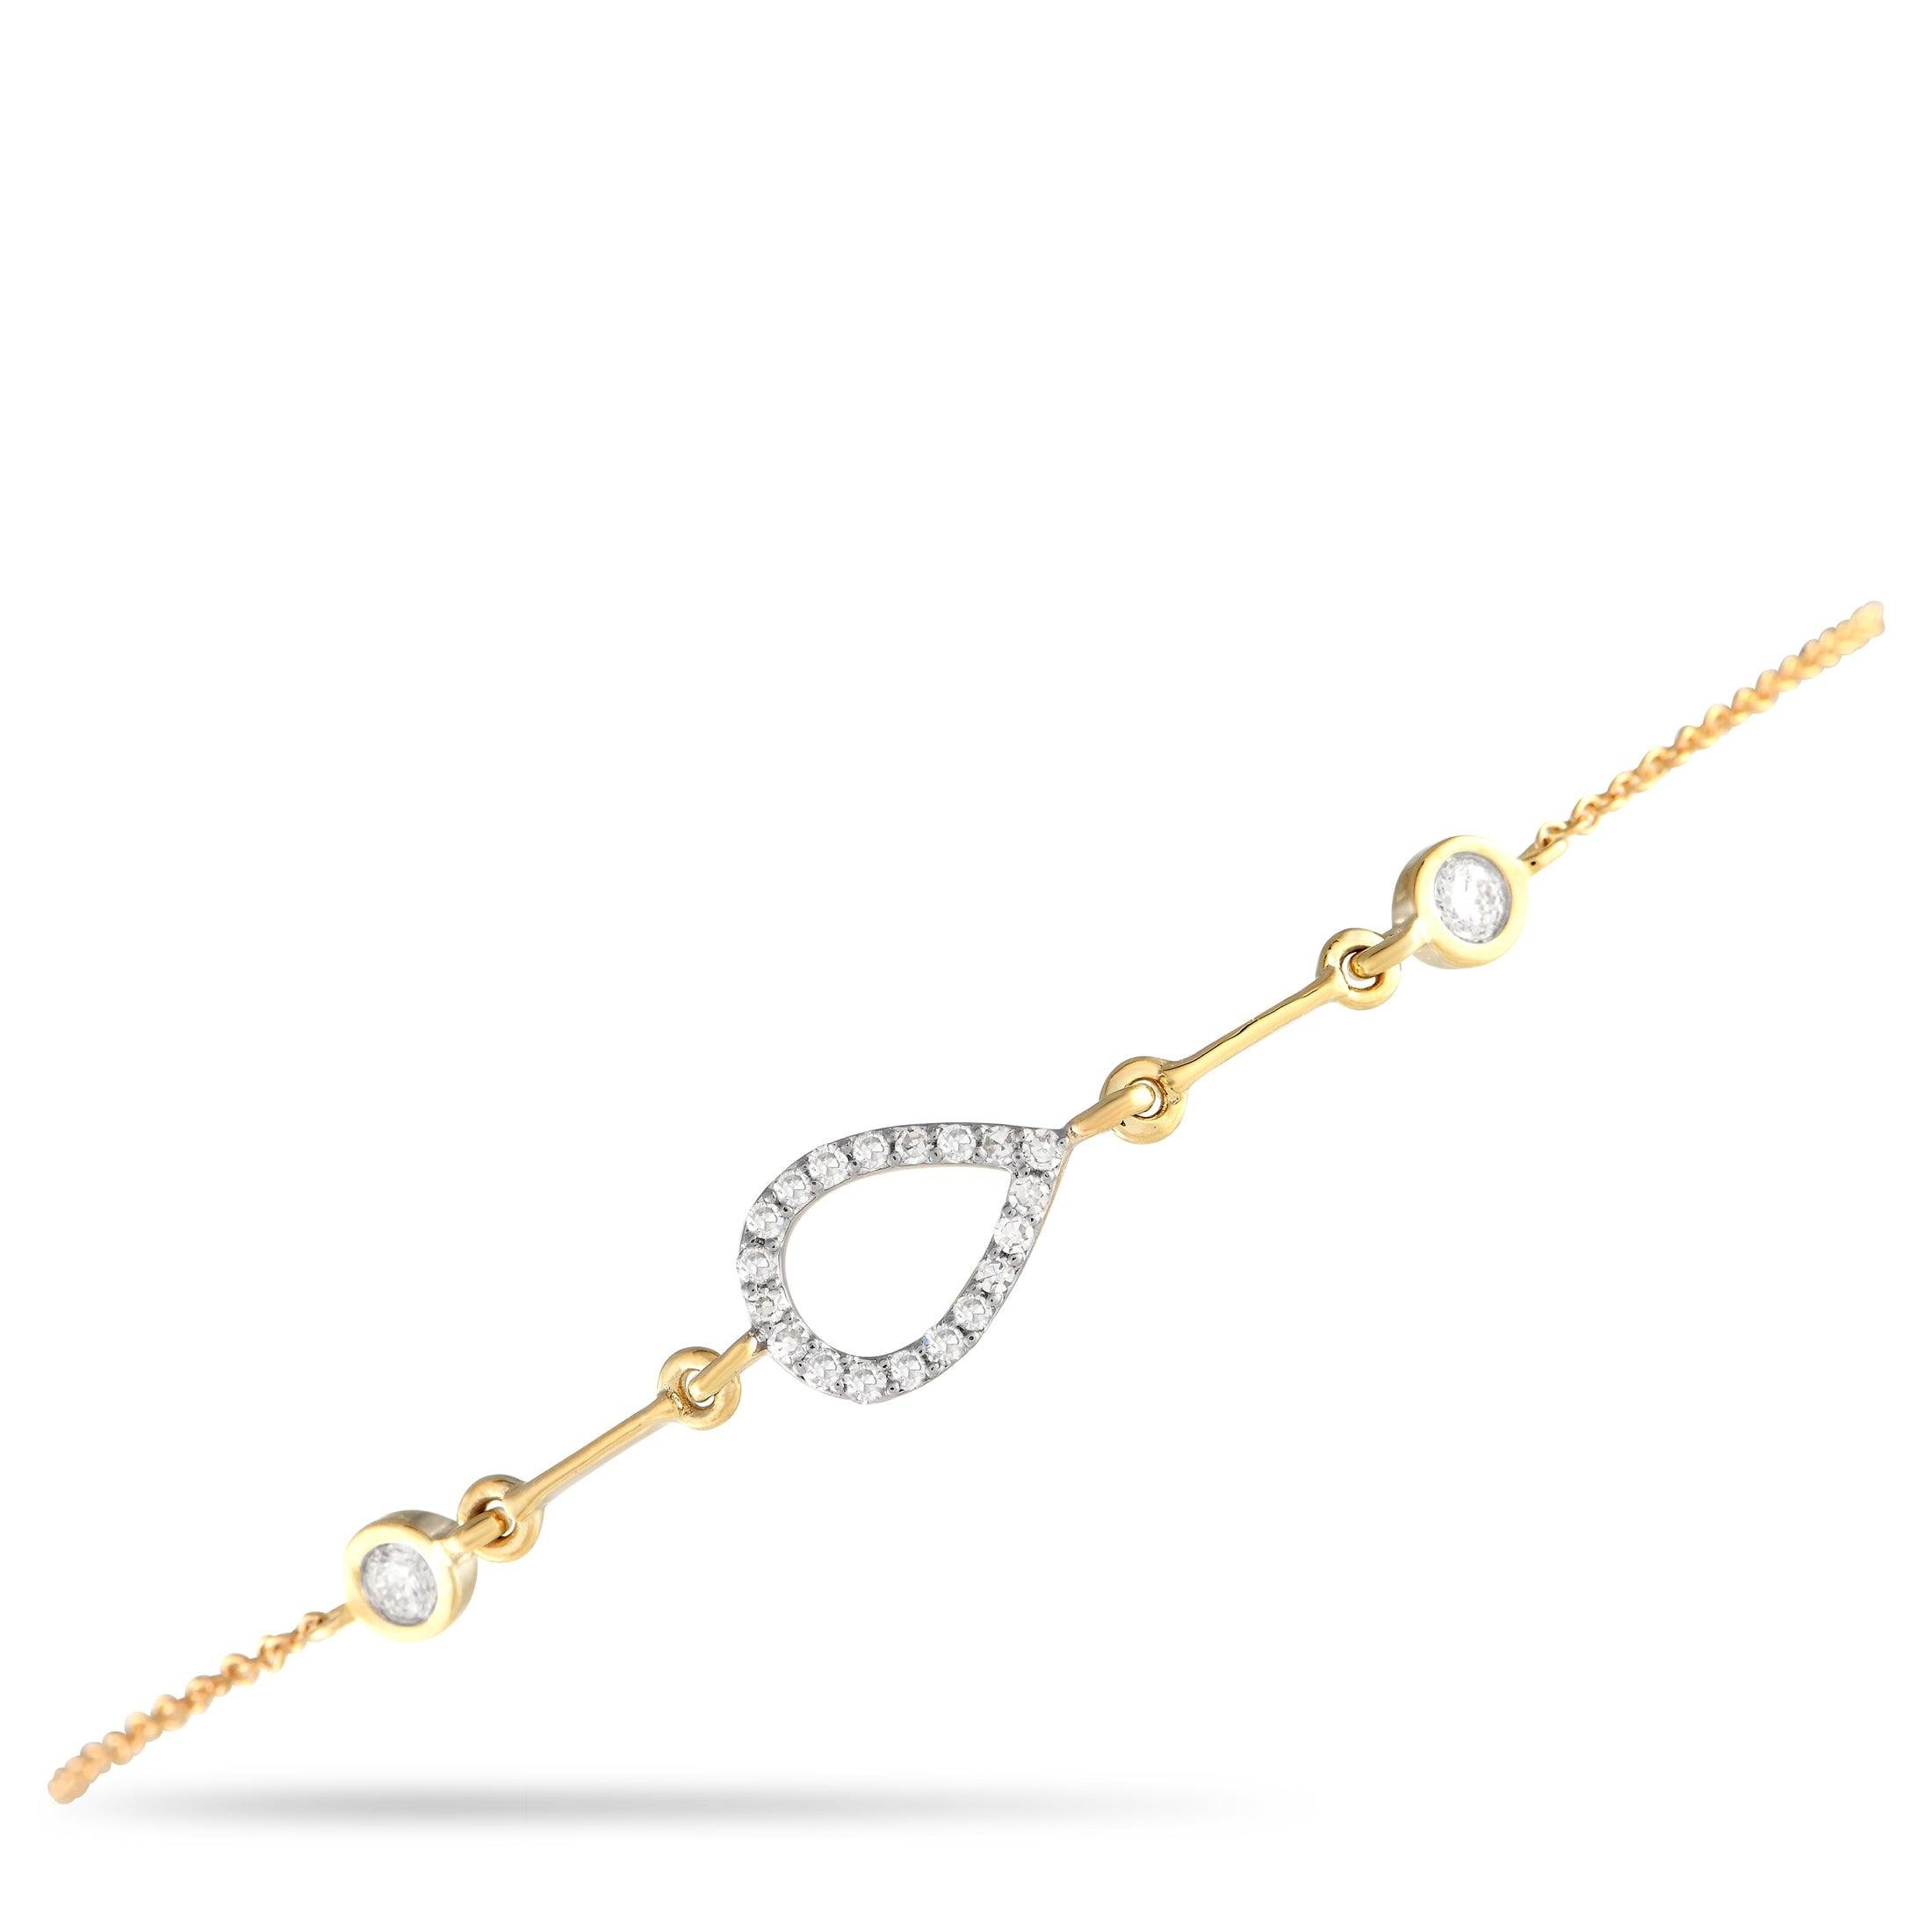 LB Exclusive 14K Yellow Gold 0.16ct Diamond Bracelet BR09683-Y by NON BRANDED